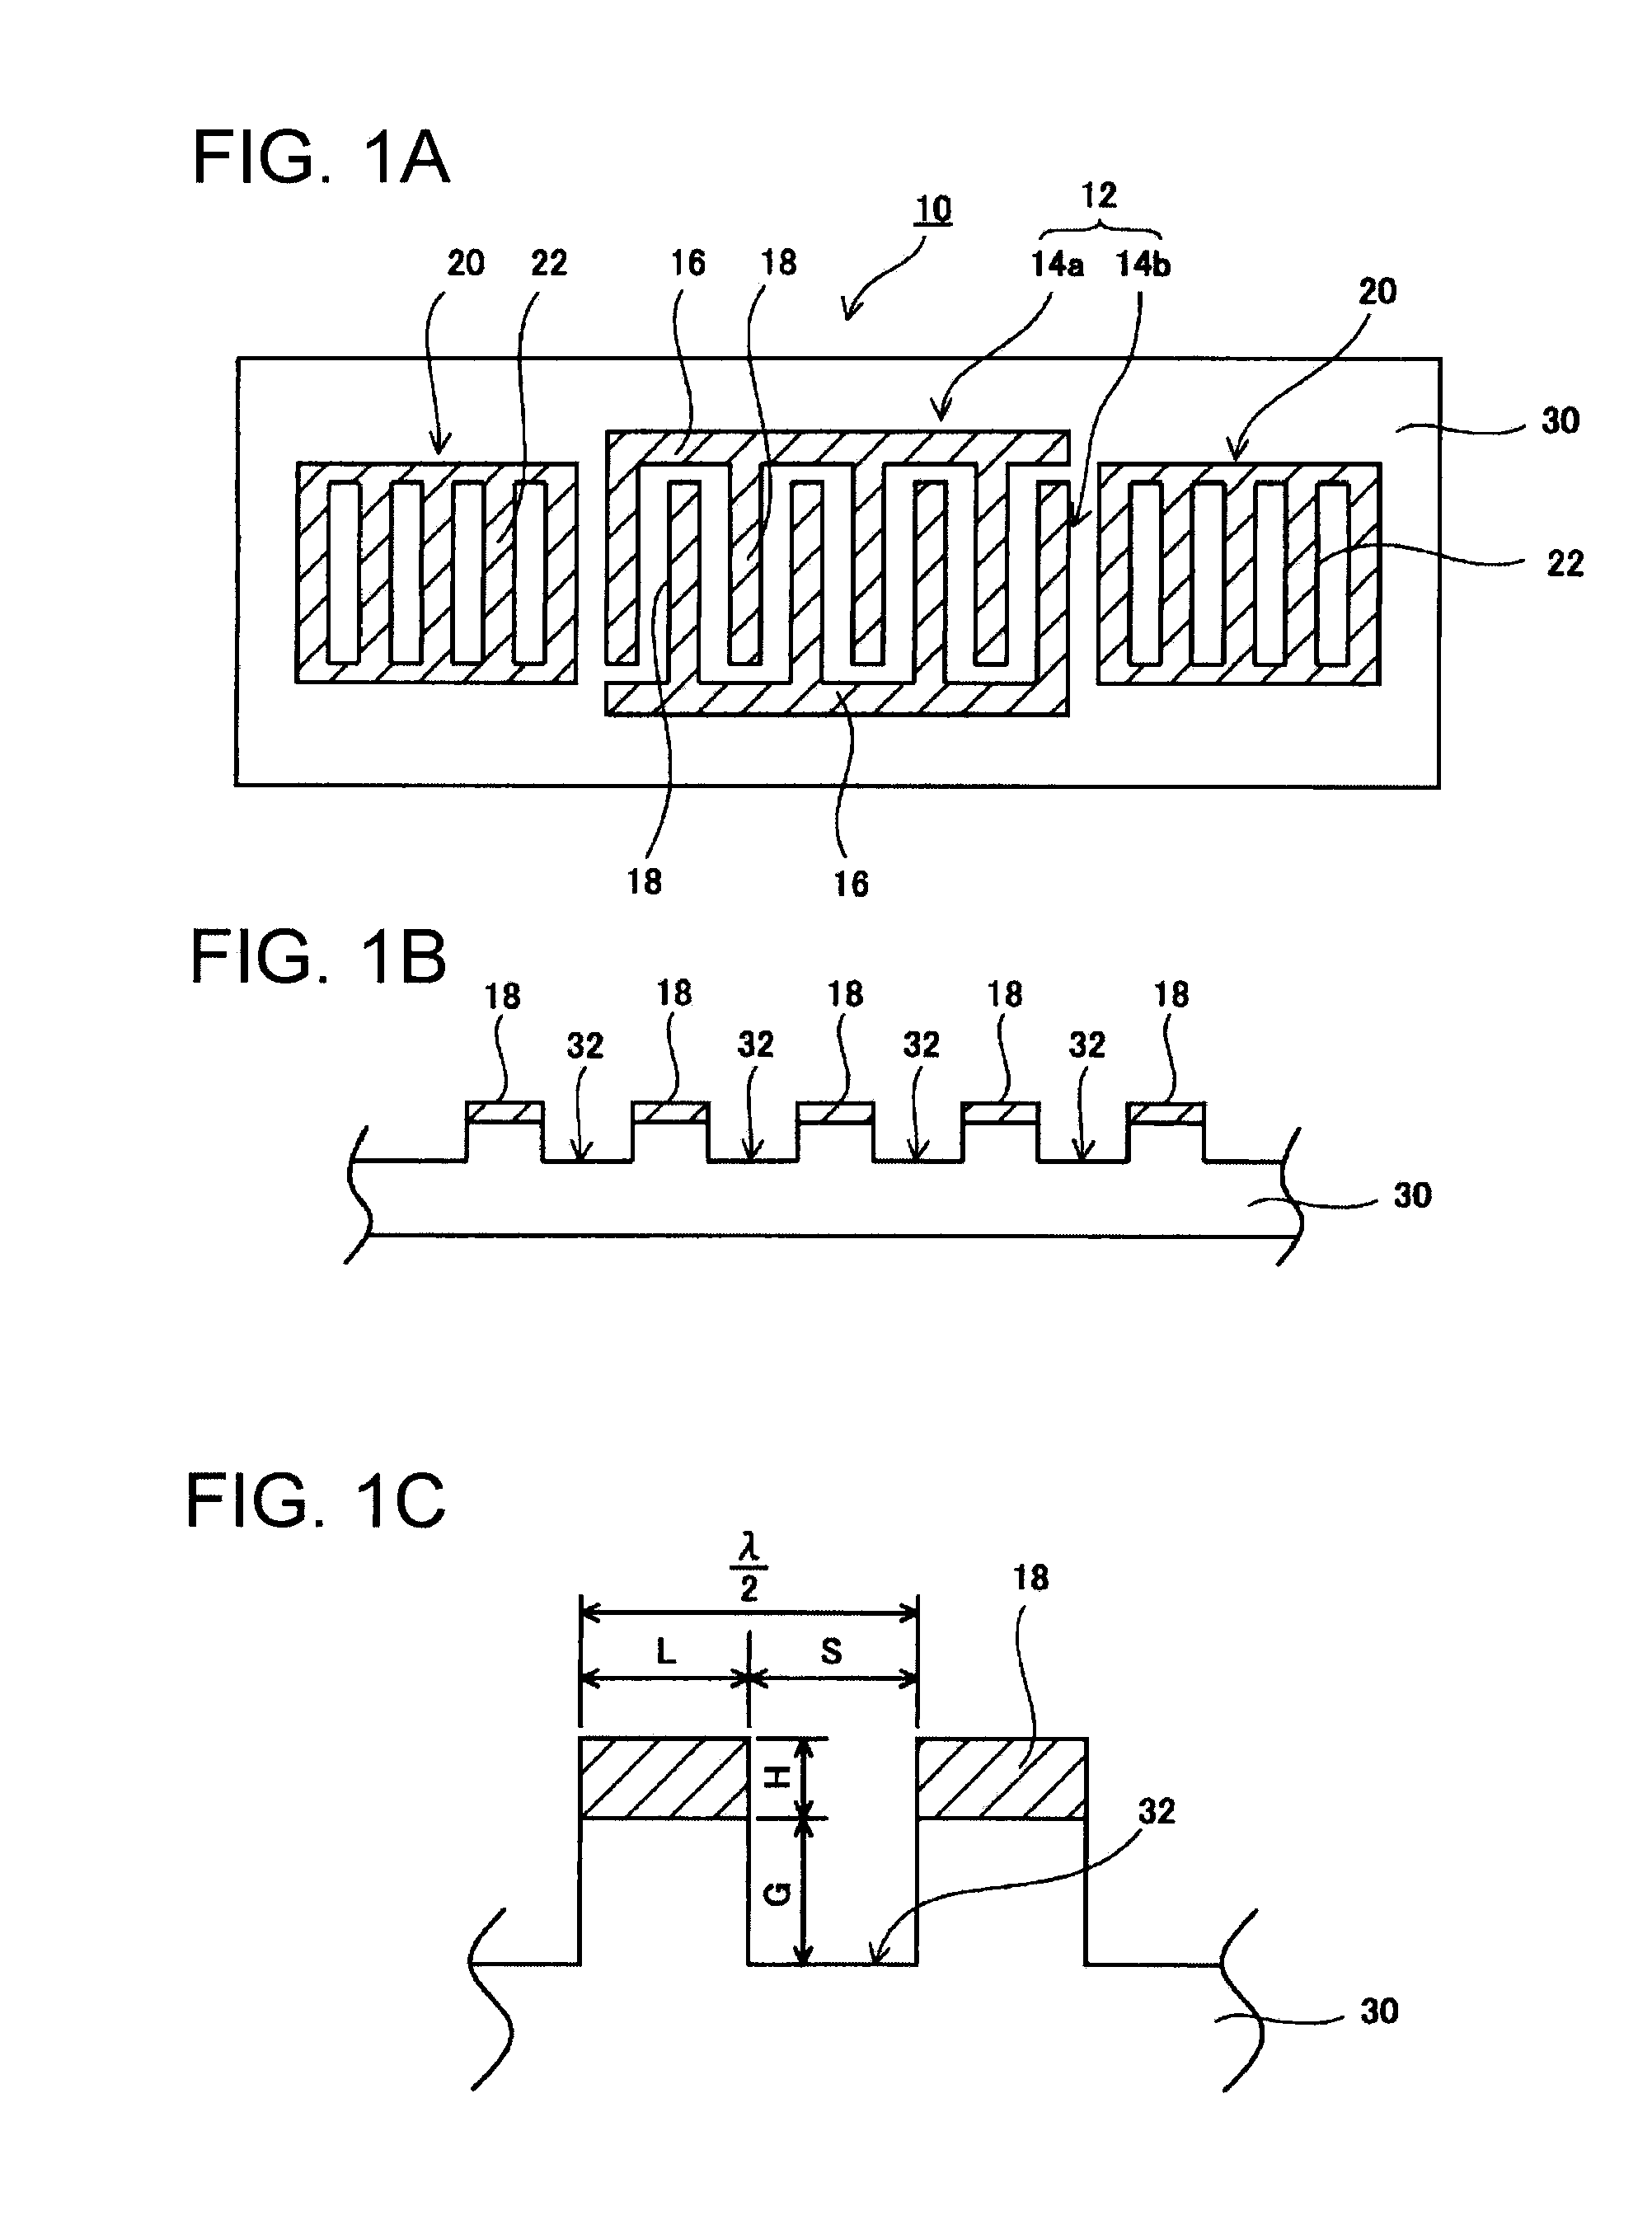 Surface acoustic wave resonator and surface acoustic wave oscillator